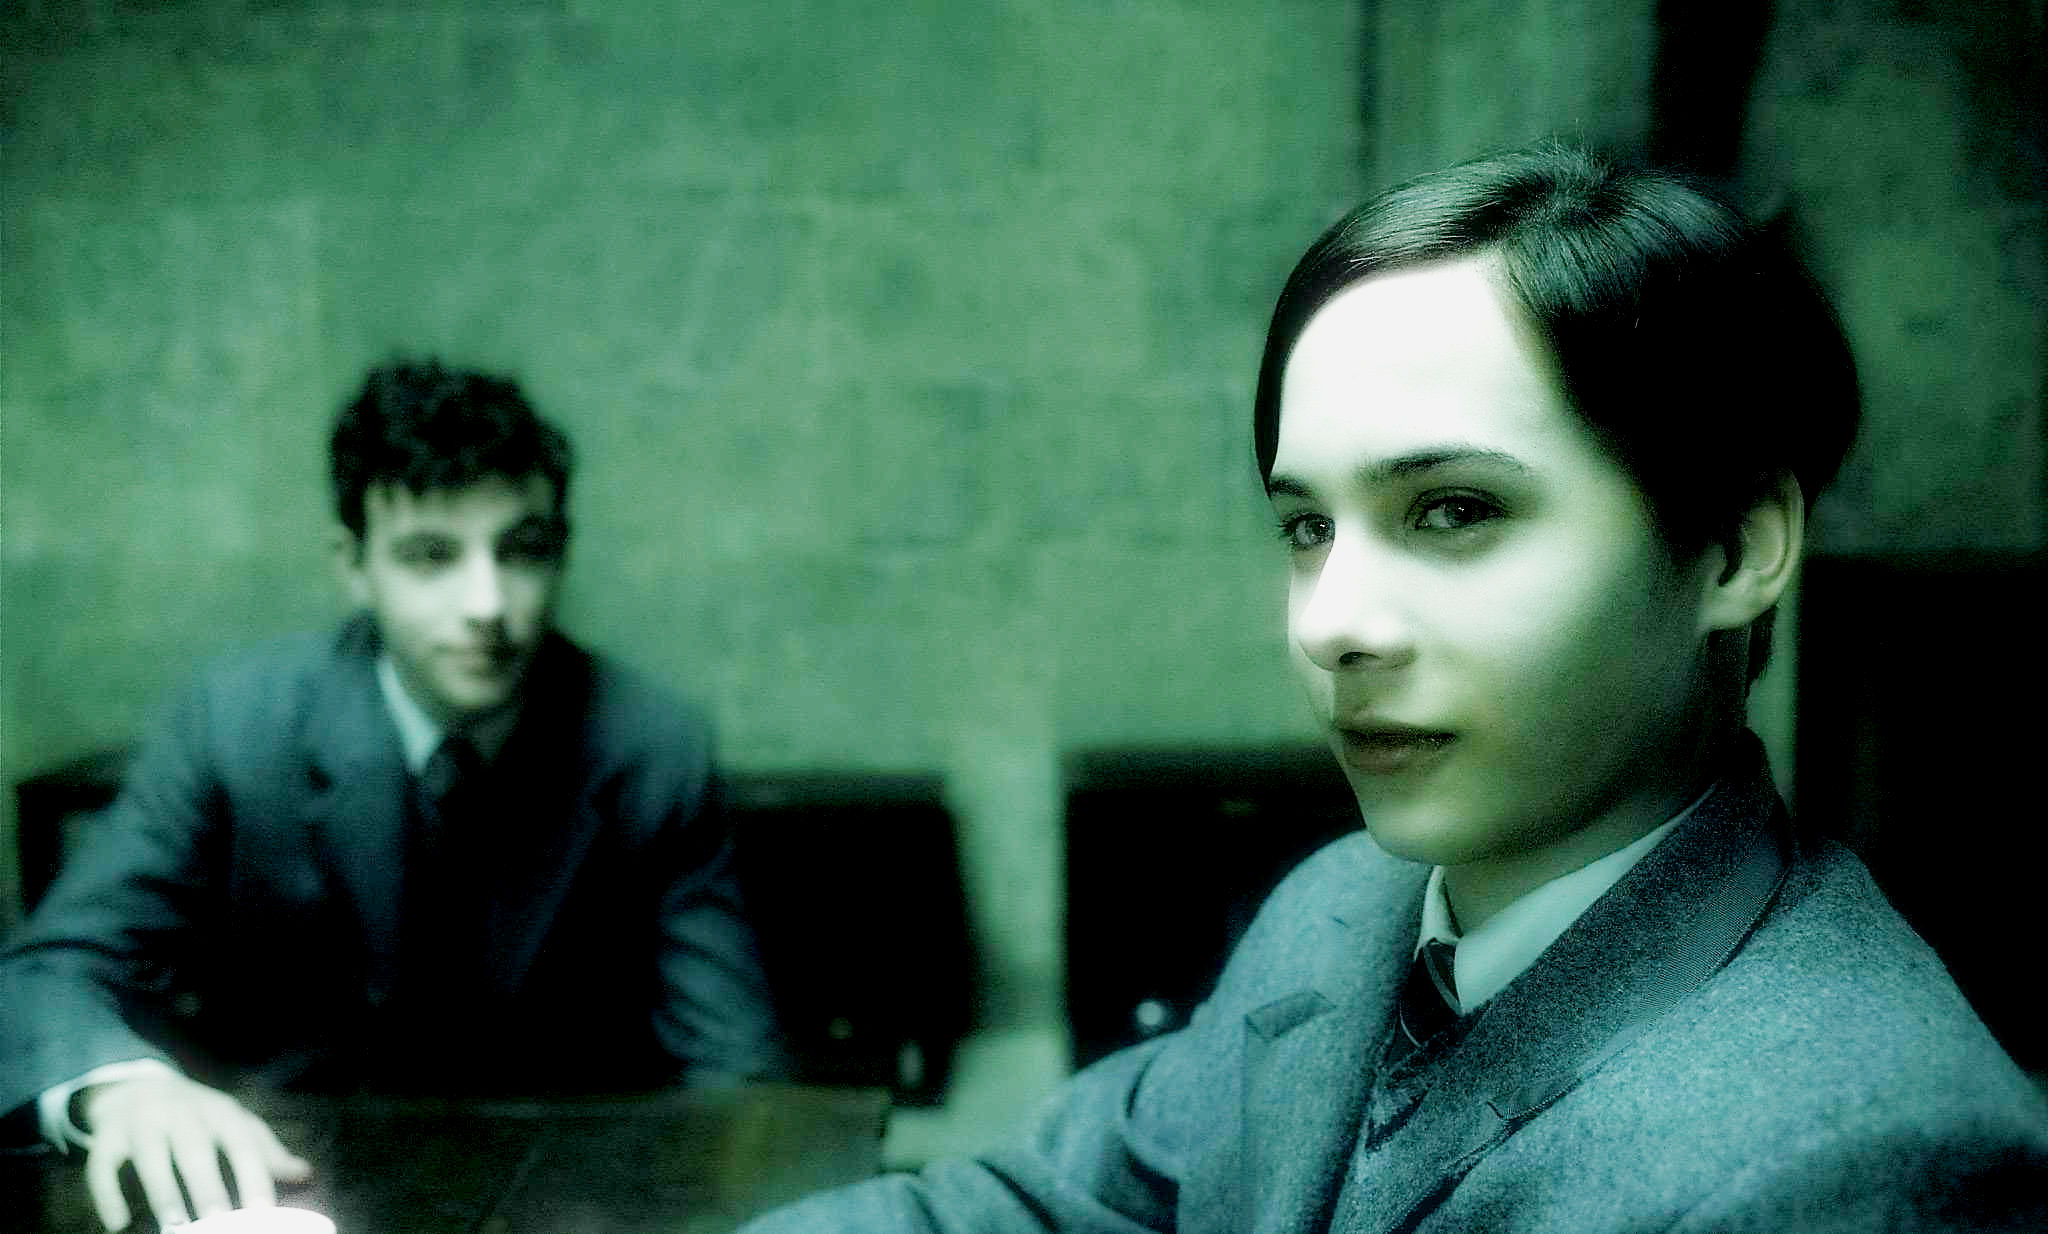 Frank Dillane stars as Tom Riddle - Age 16 in Warner Bros Pictures' Harry Potter and the Half-Blood Prince (2009)